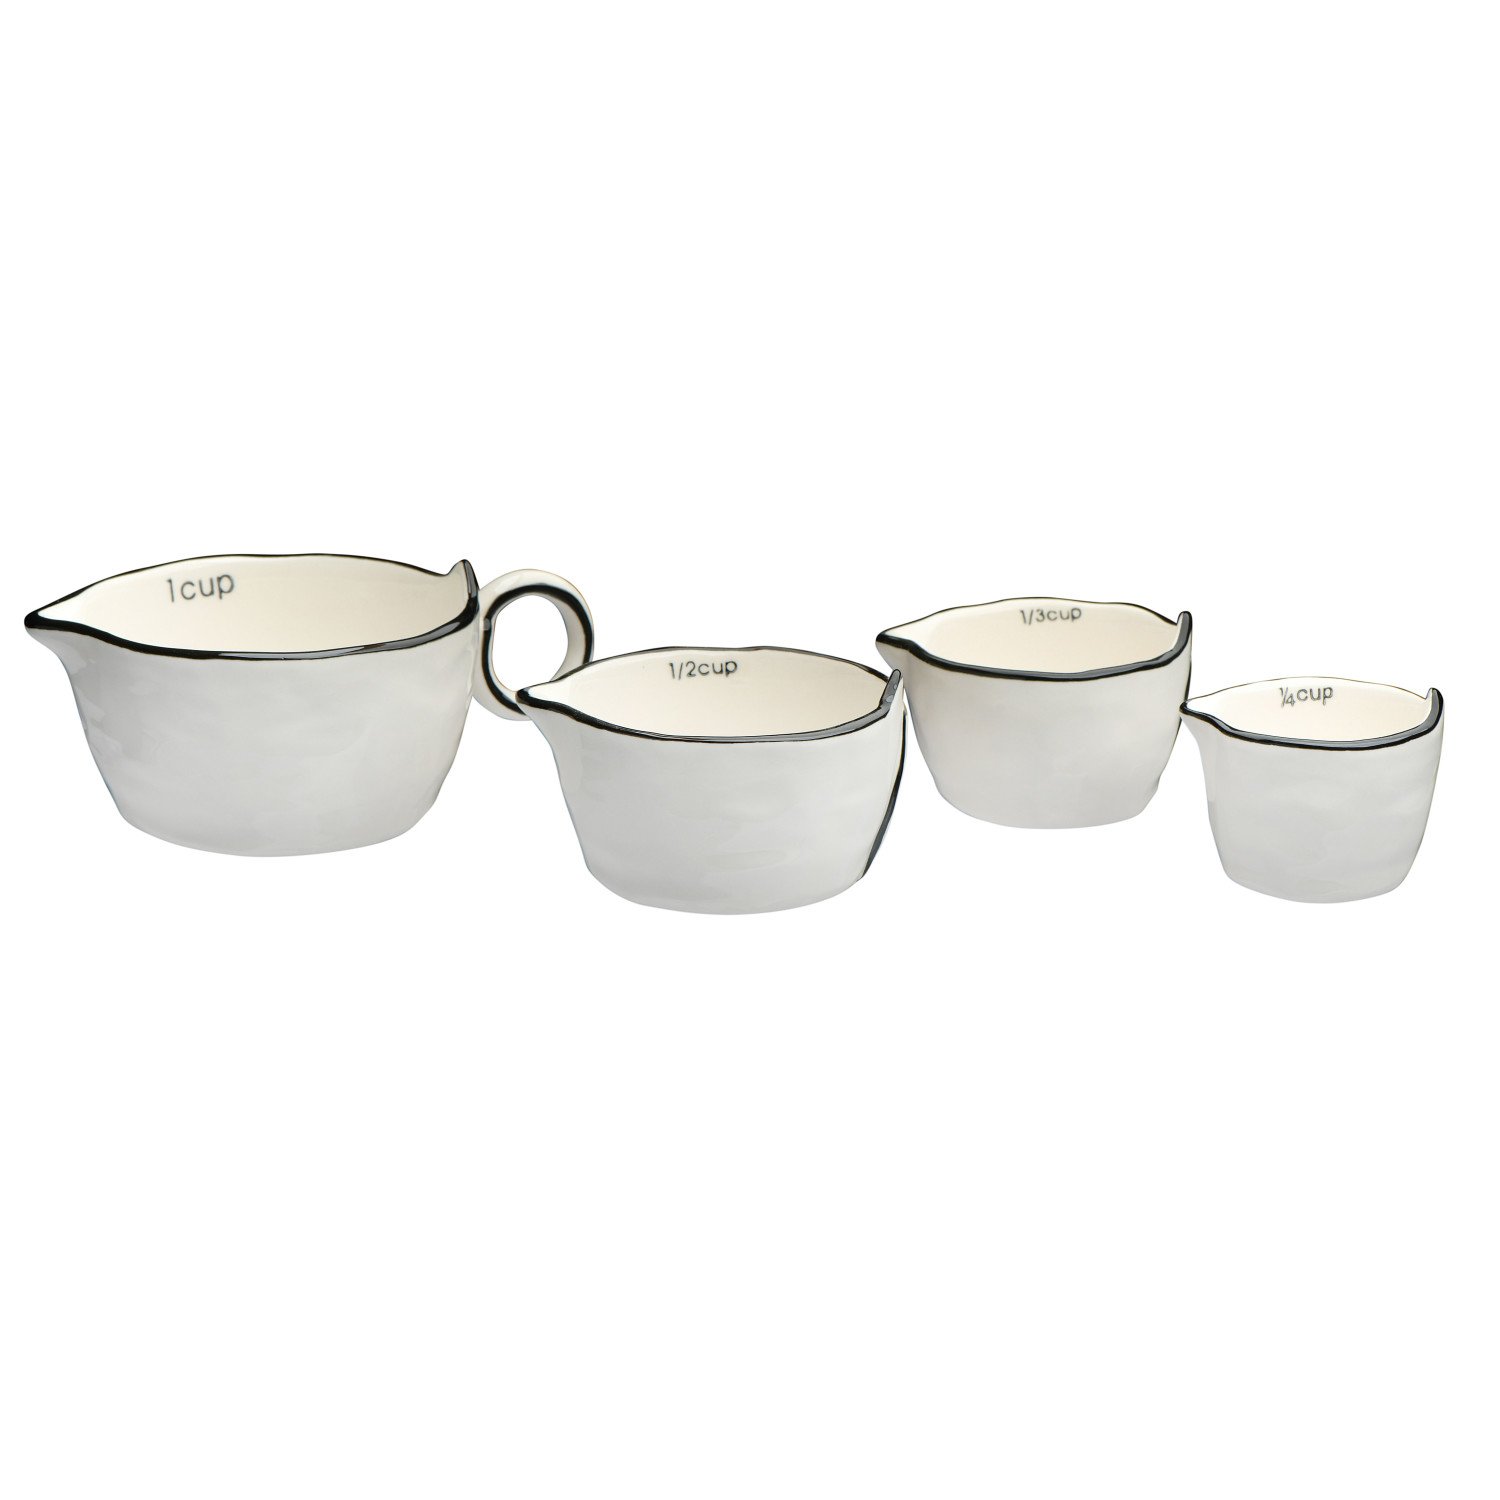 Stoneware Measuring Cups White With Black Rim Set Of 4 - Nadeau